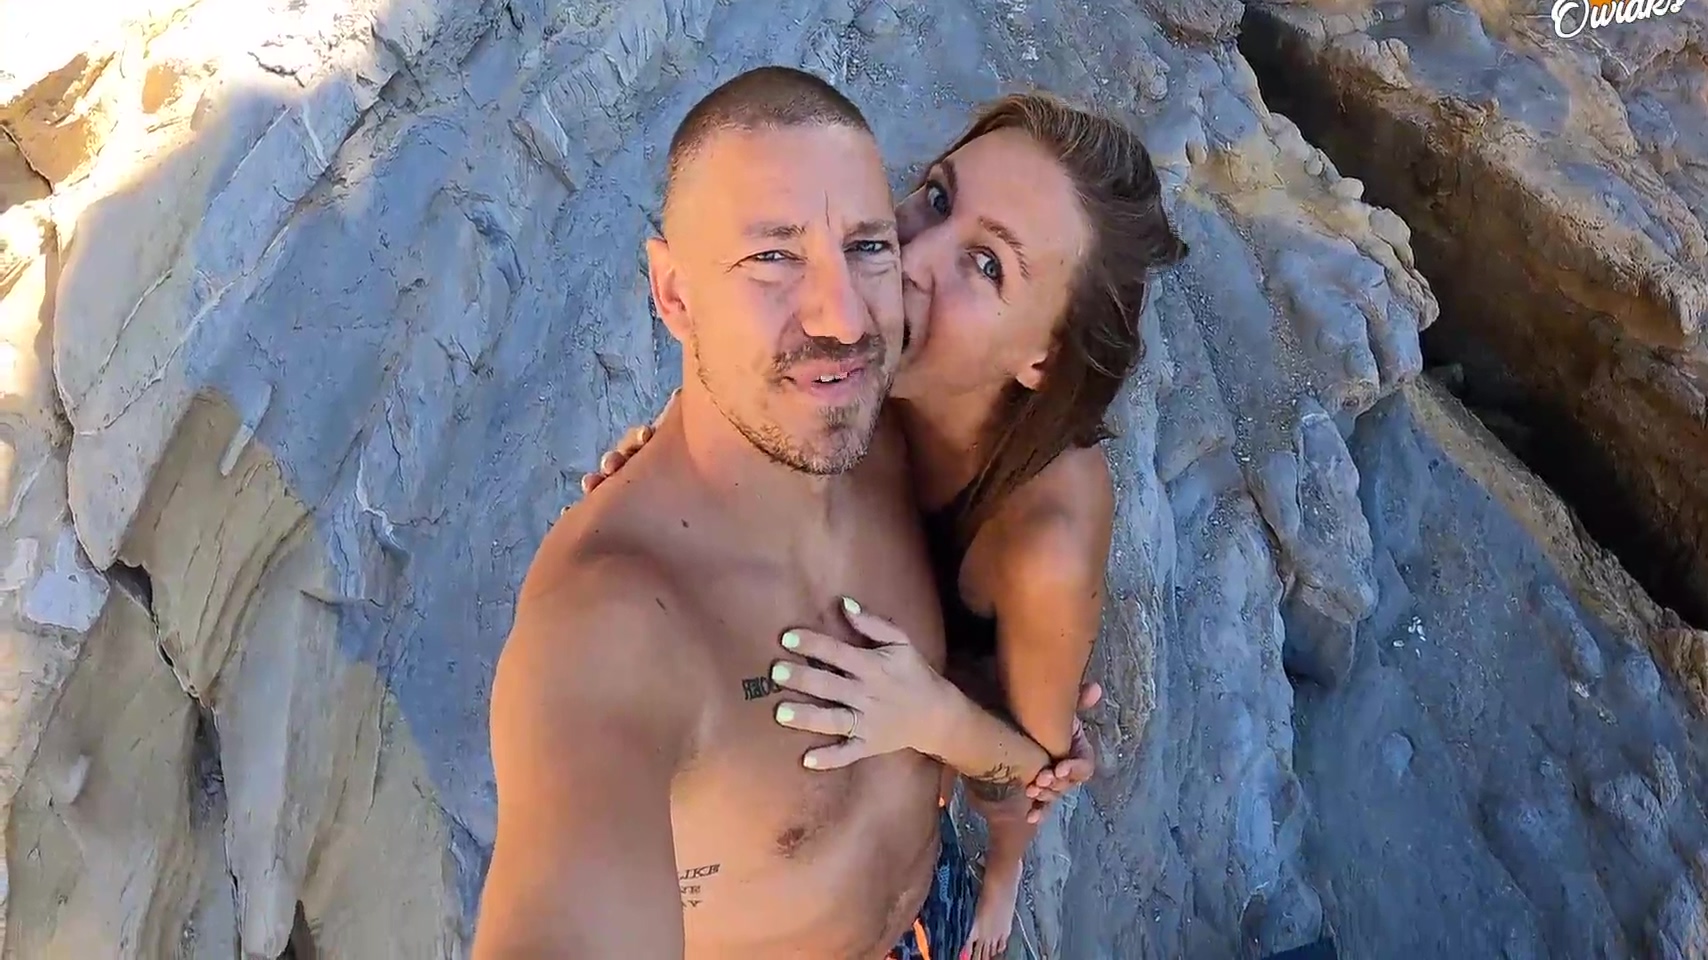 Mateo Owiak, Owiaks And Yuli Owiak In Go Wild! Pov Fucking In A Cave On The Spanish Coast 8 Min - Video Free Porn Videos picture picture